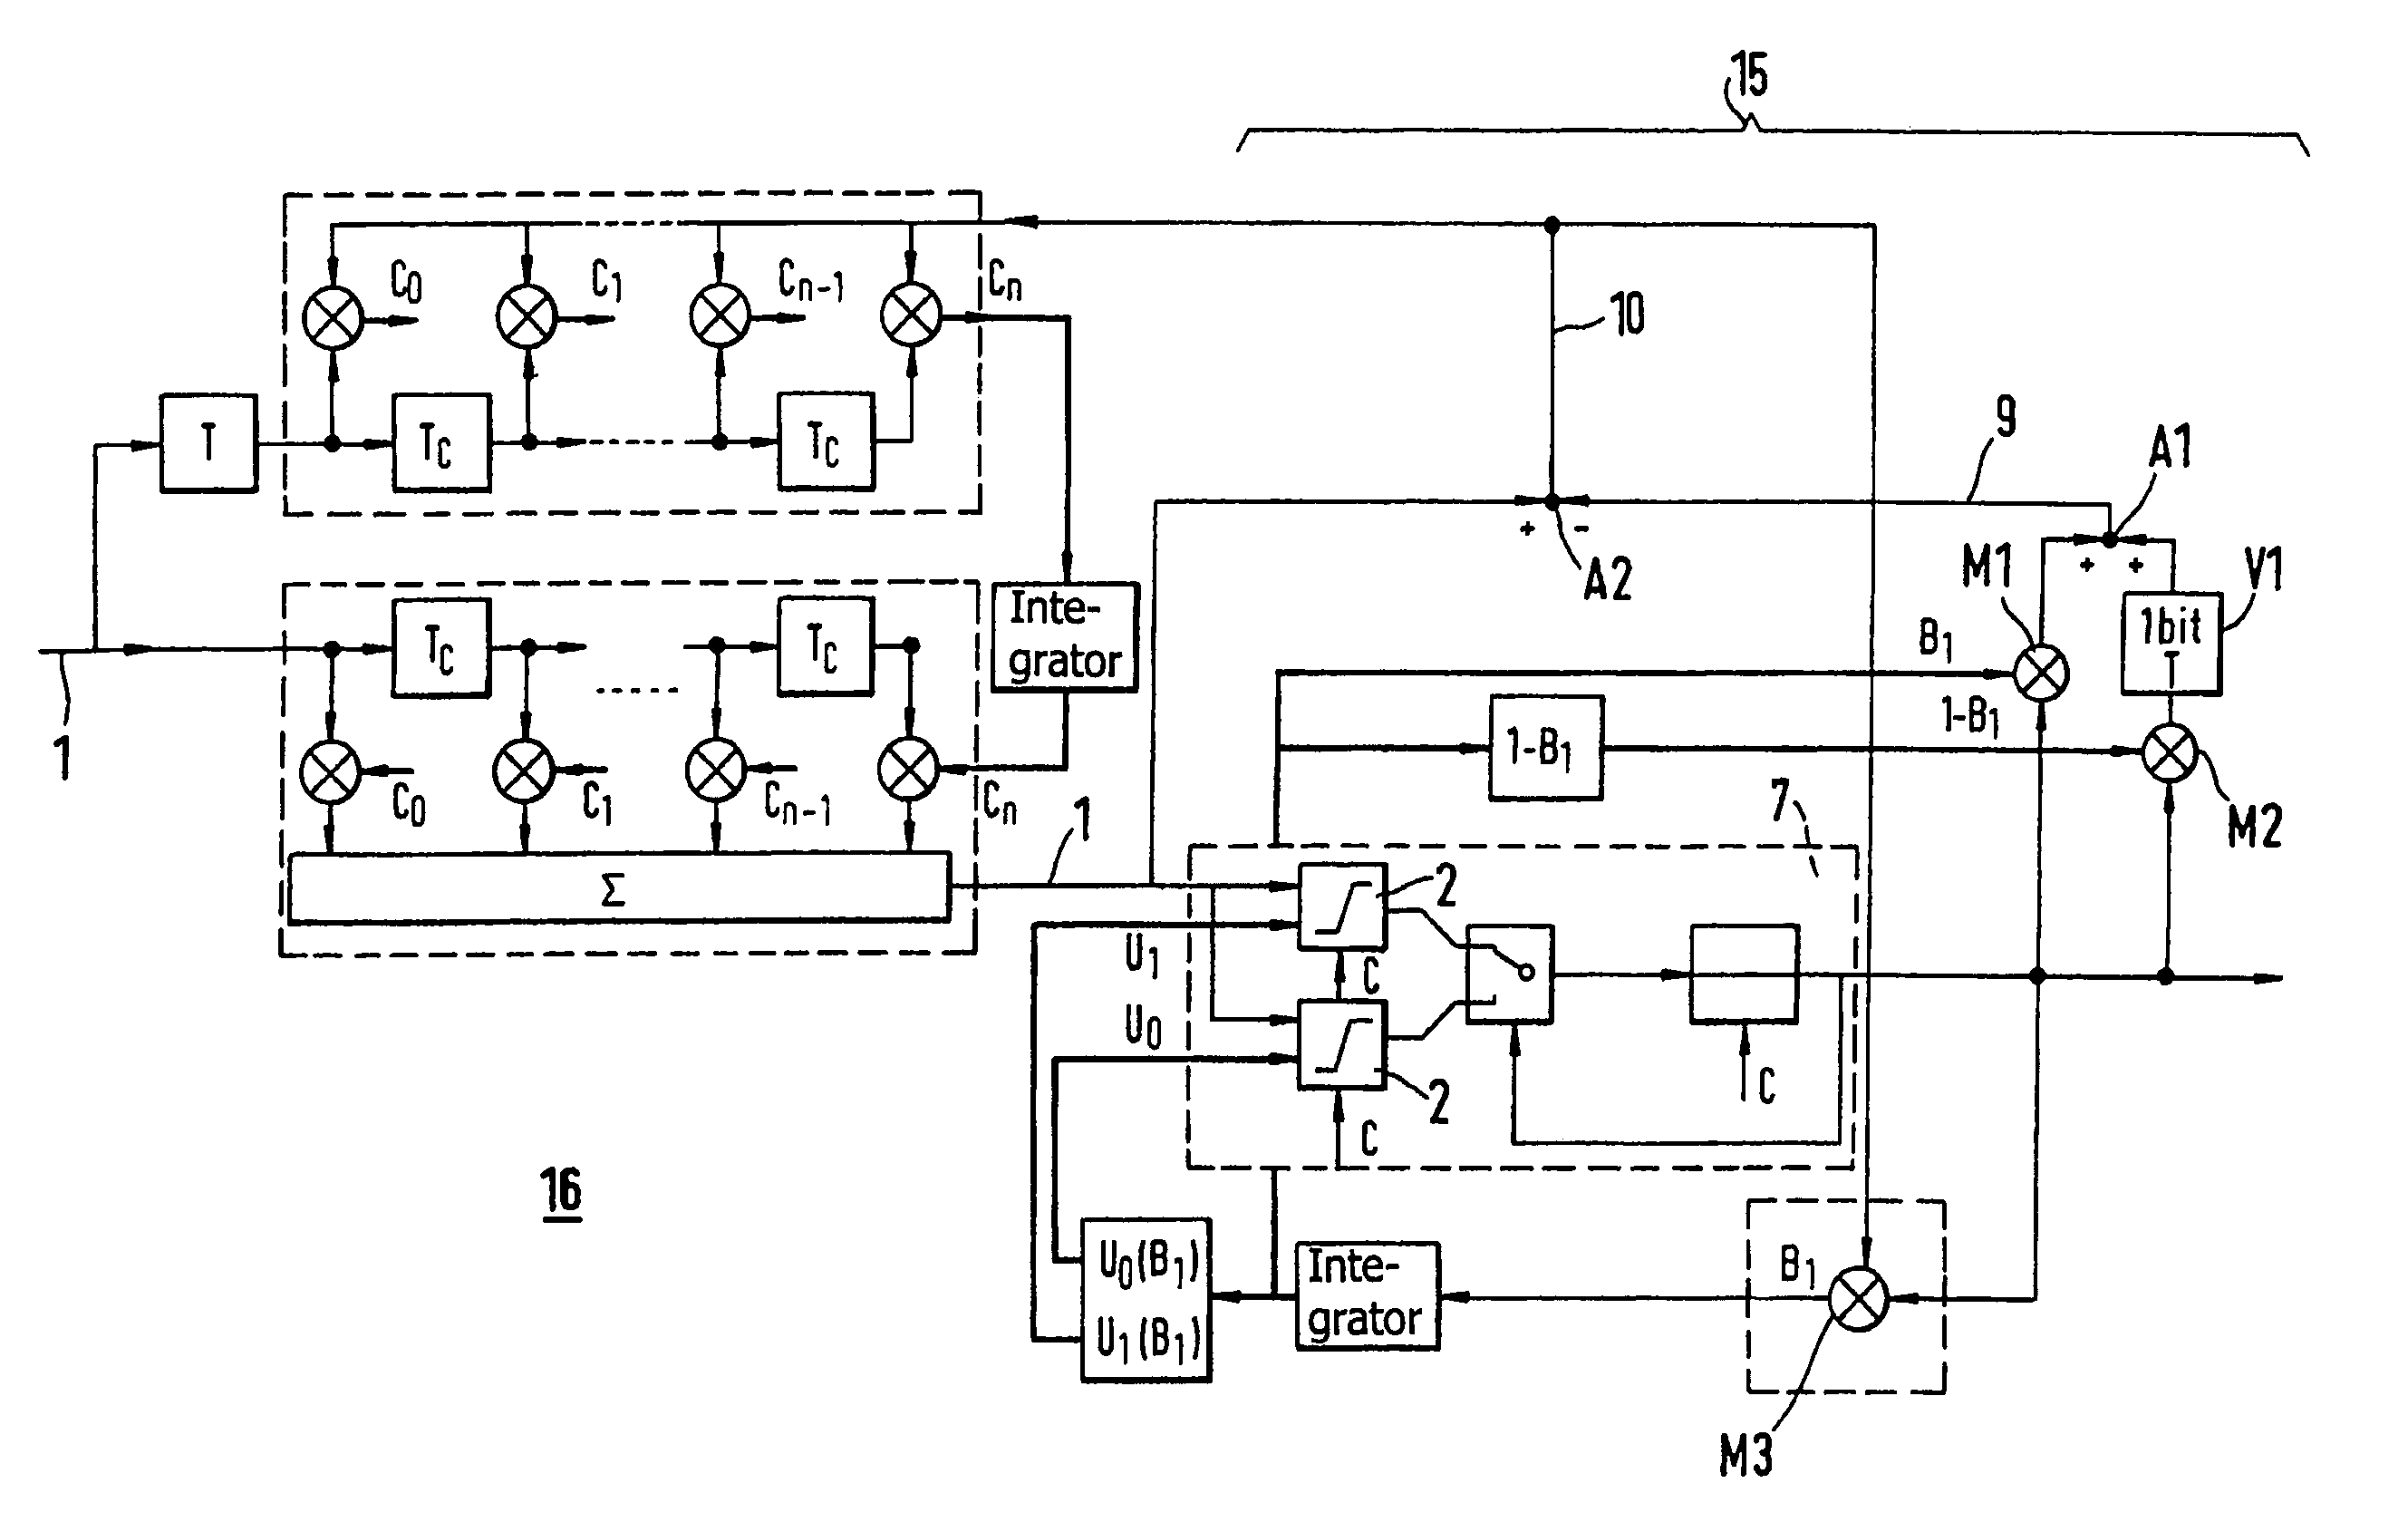 Process for recovering digital optical signals and a feedback decision circuit